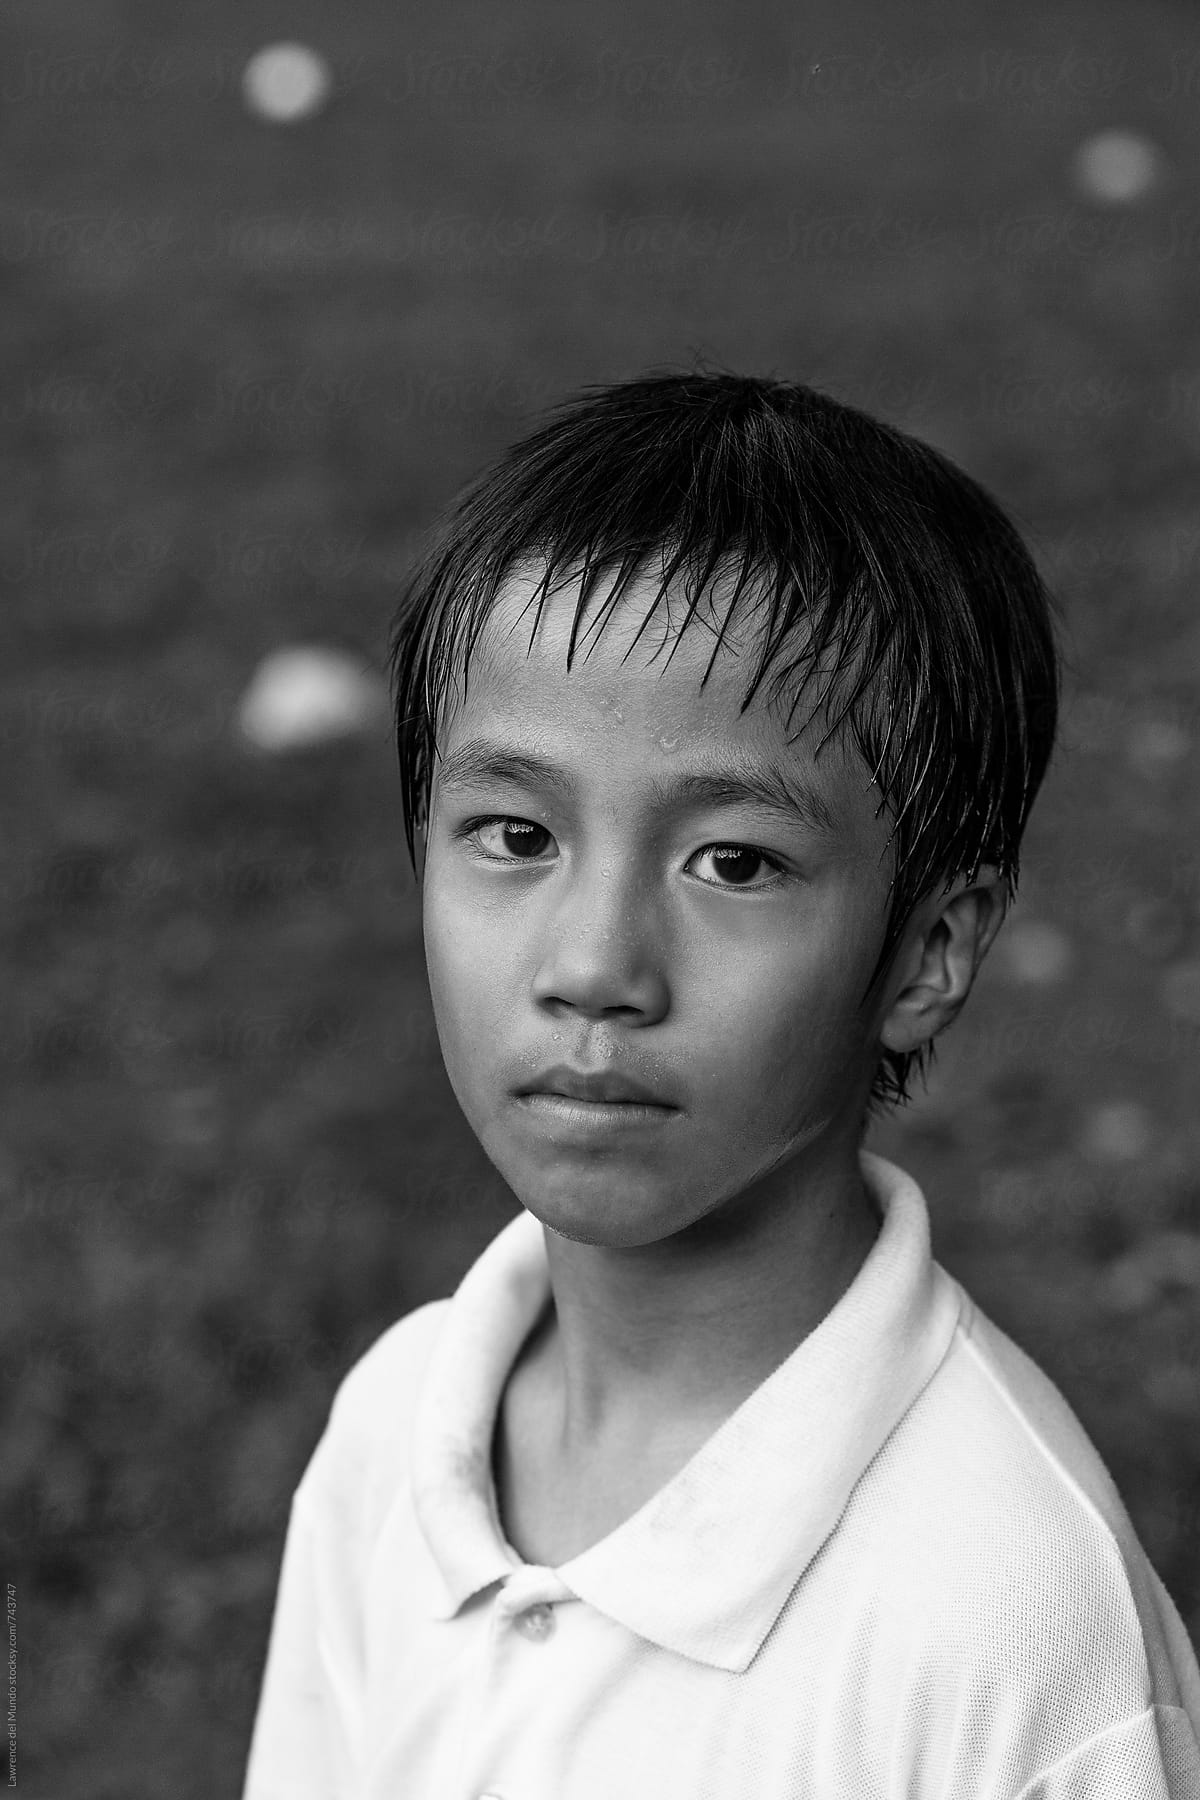 Portrait of a young football player putting on his game face